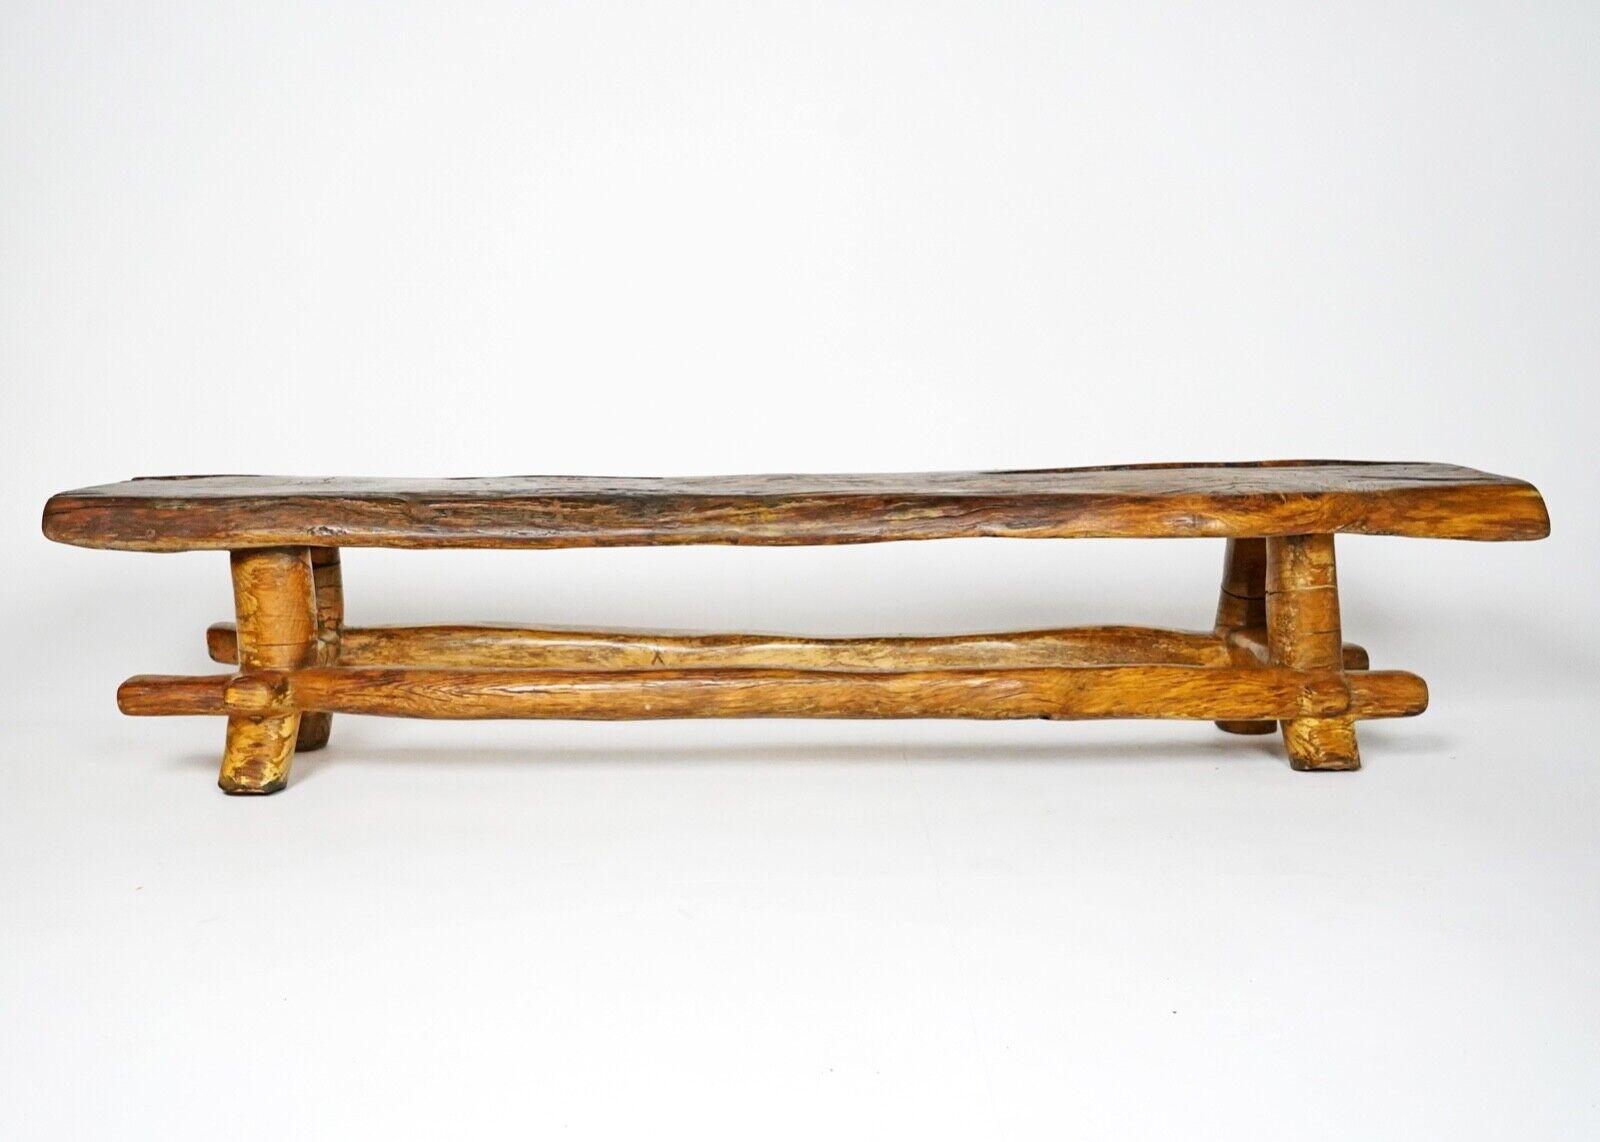 A beautifully tactile coffee table or bench carved from a single piece of oak.
Hand carved by the artist Maxie Lane, signed and dated 1988 on the underside. 
We think this piece could be used as a coffee table and in the right interior would be